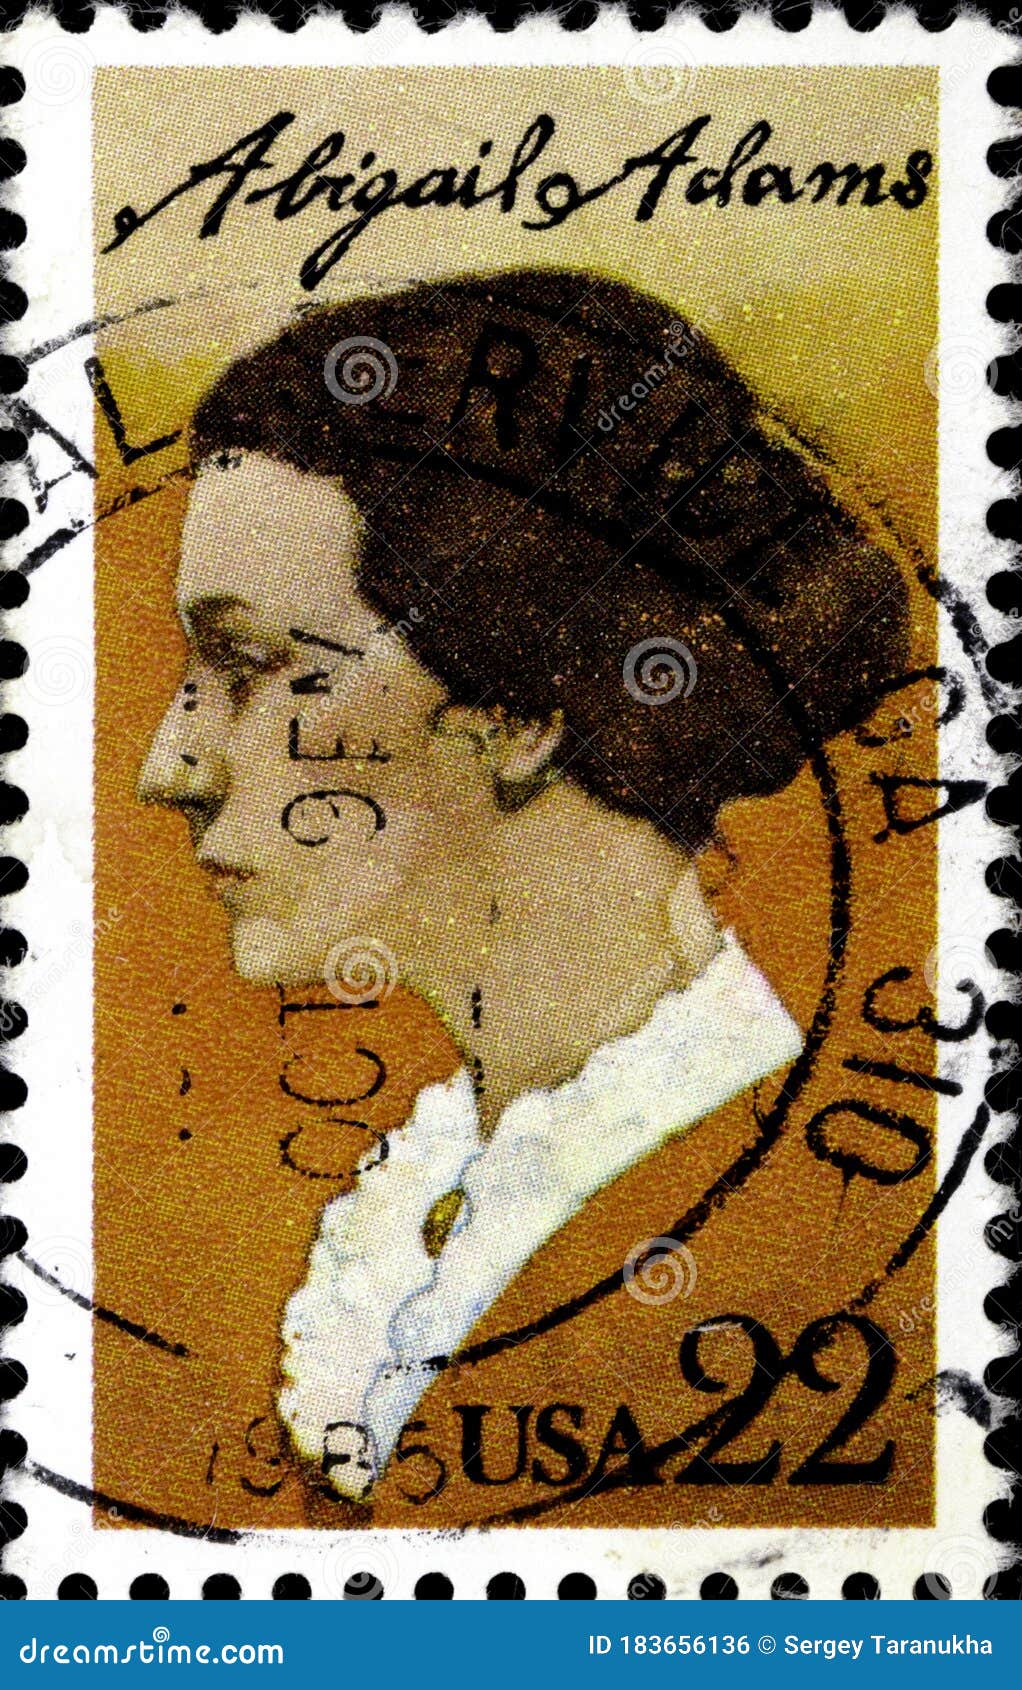 02 11 Divnoe Stavropol Territory Russia Postage Stamp Usa 1985 Abigail Adams 1744 1818 Portrait Of The Woman In Profile On An Editorial Photo Image Of Airmail Fight